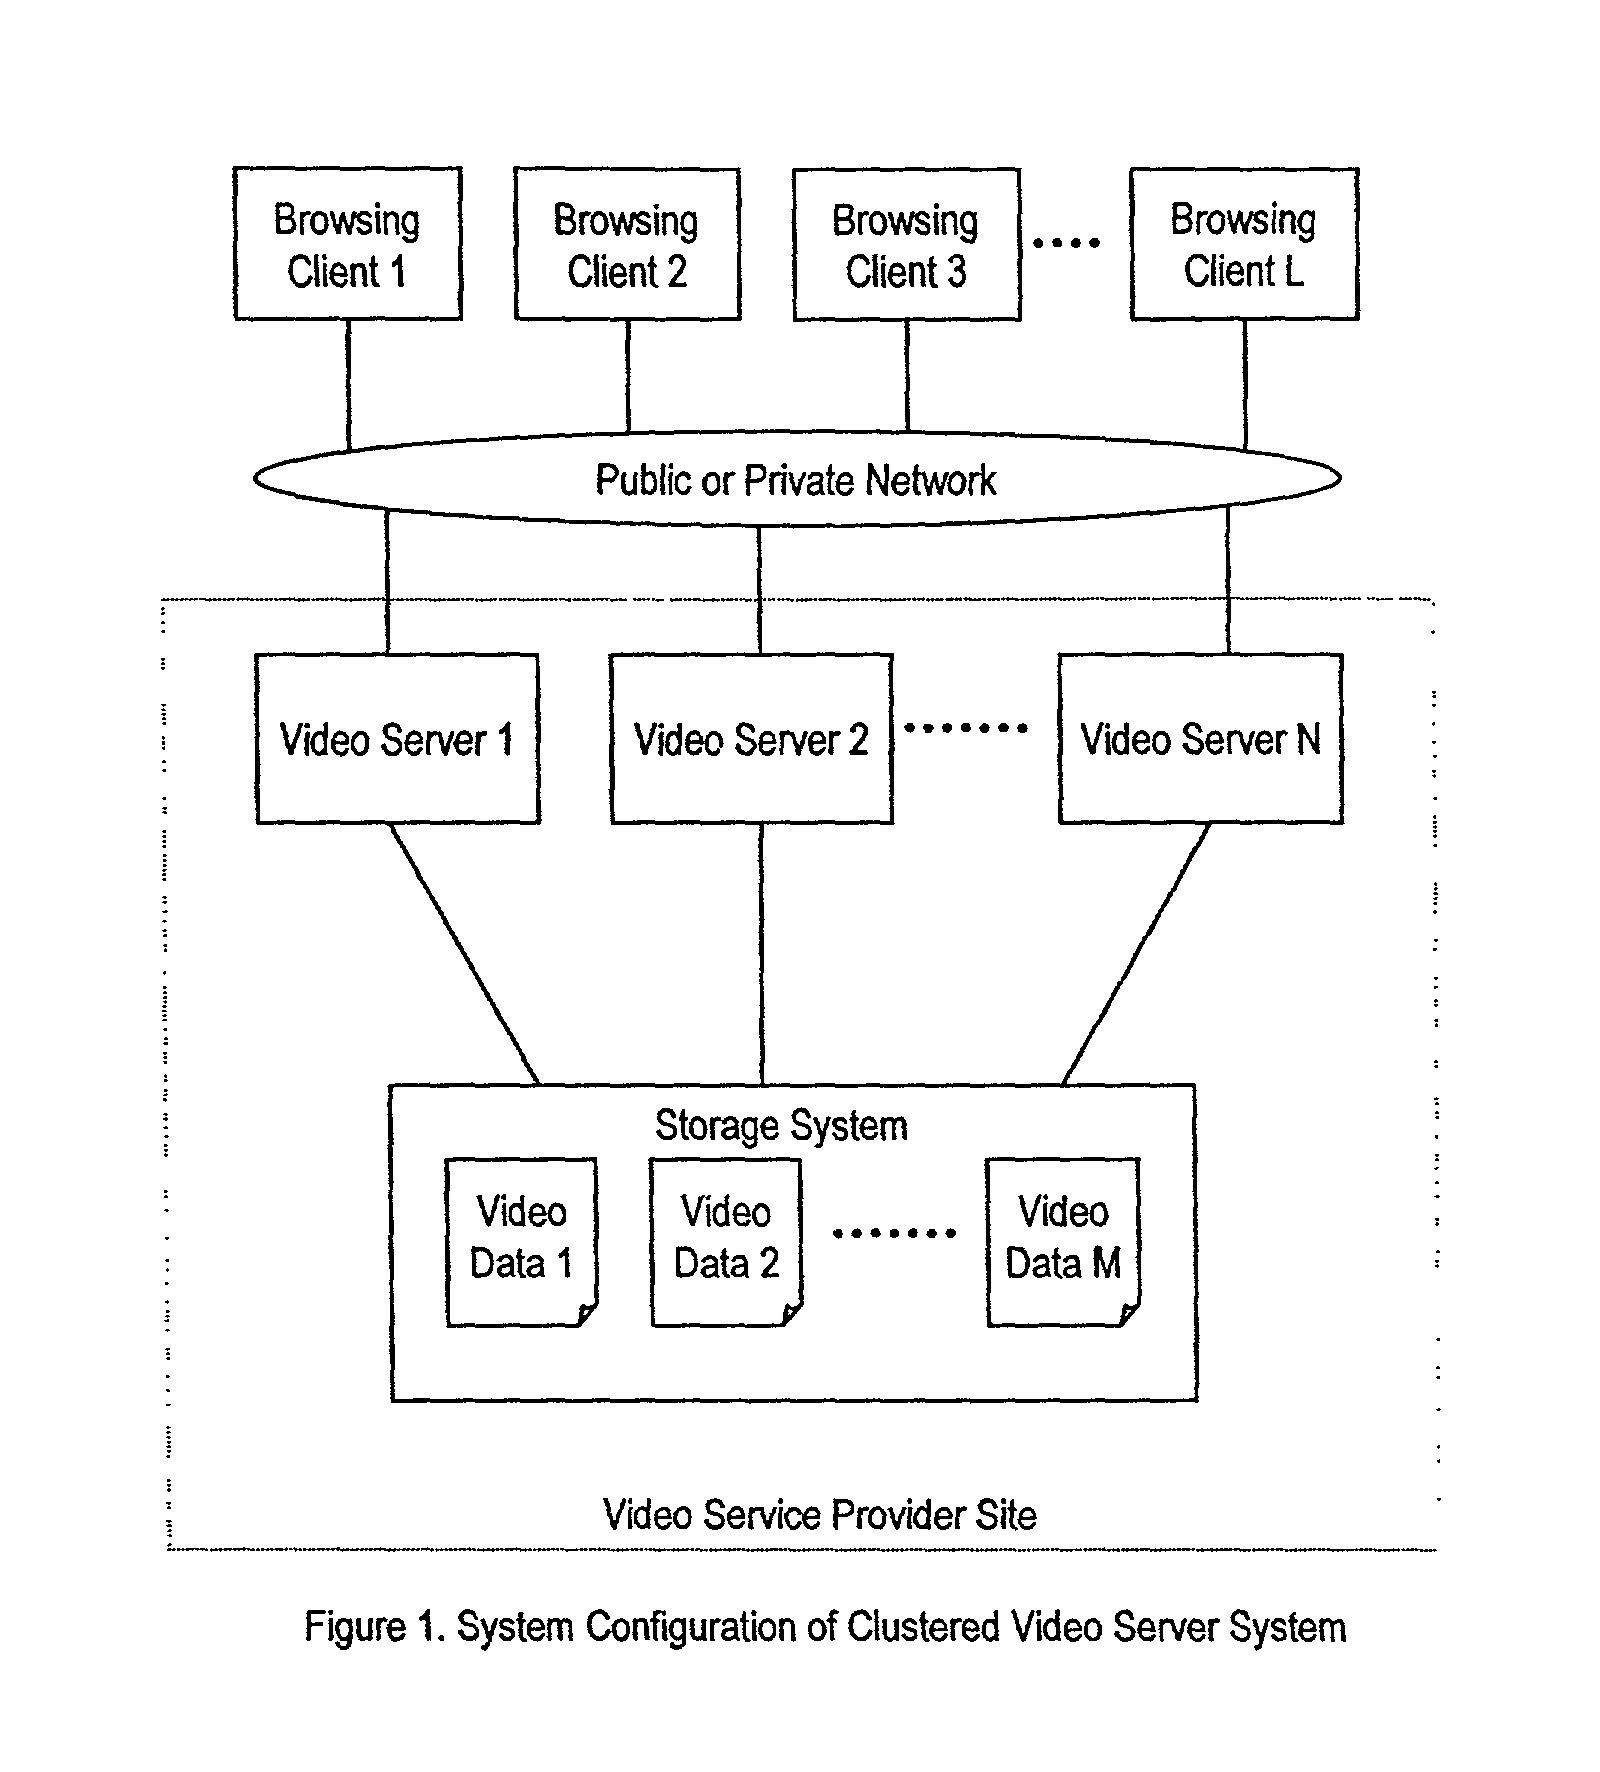 File sharing system with data mirroring by storage systems